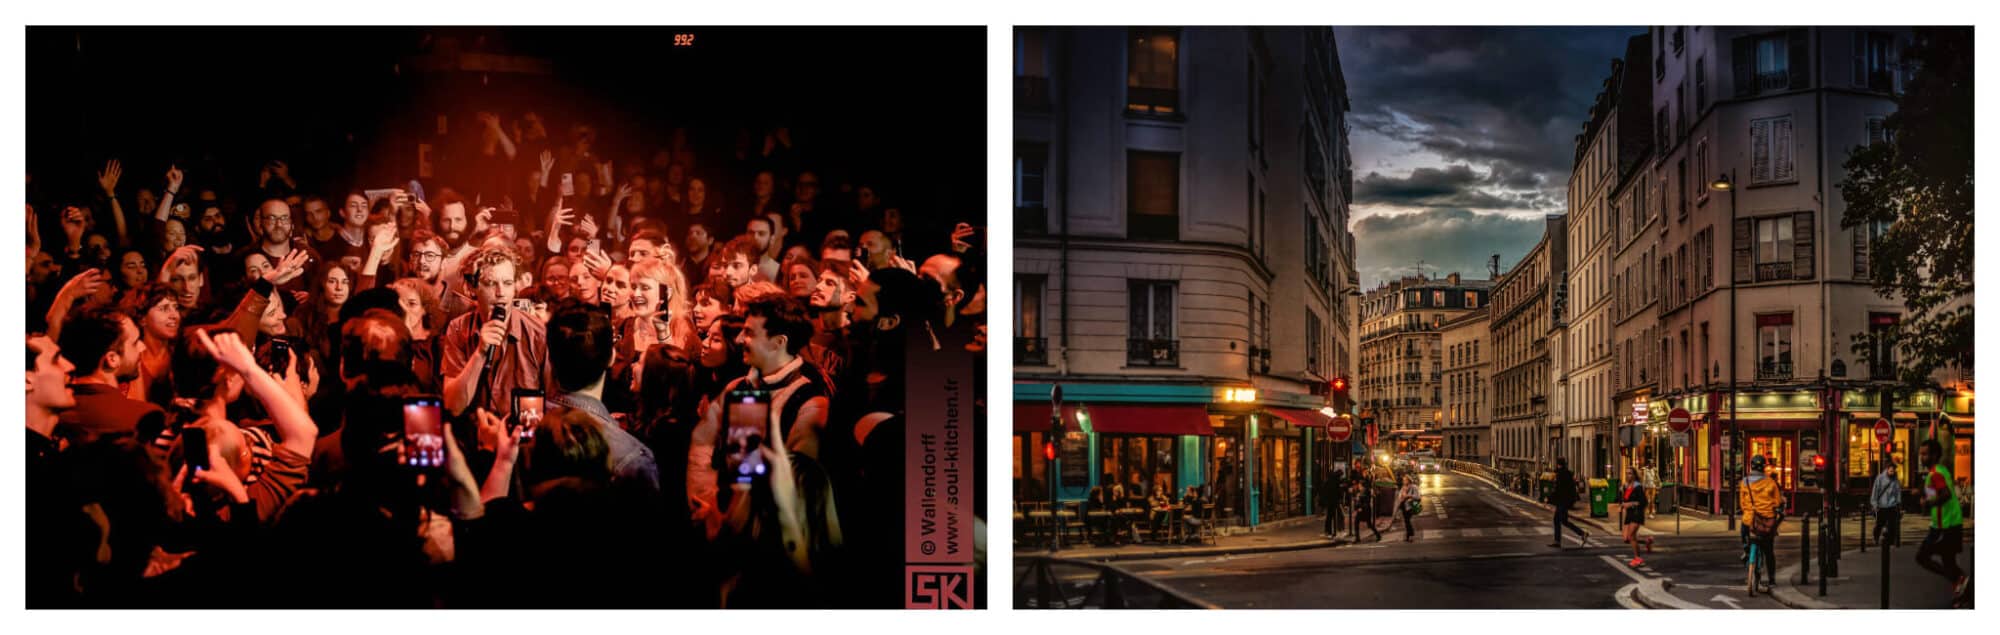 Right: A crowd is seen surrounding a man singing into a microphone. Several are recording him and have their hands up in the air, enjoying the music. Left: A view of a street near Canal Saint Martin in the evening with many cafes open and the facades of Parisian buildings nicely lit by the afternoon and evening sun.